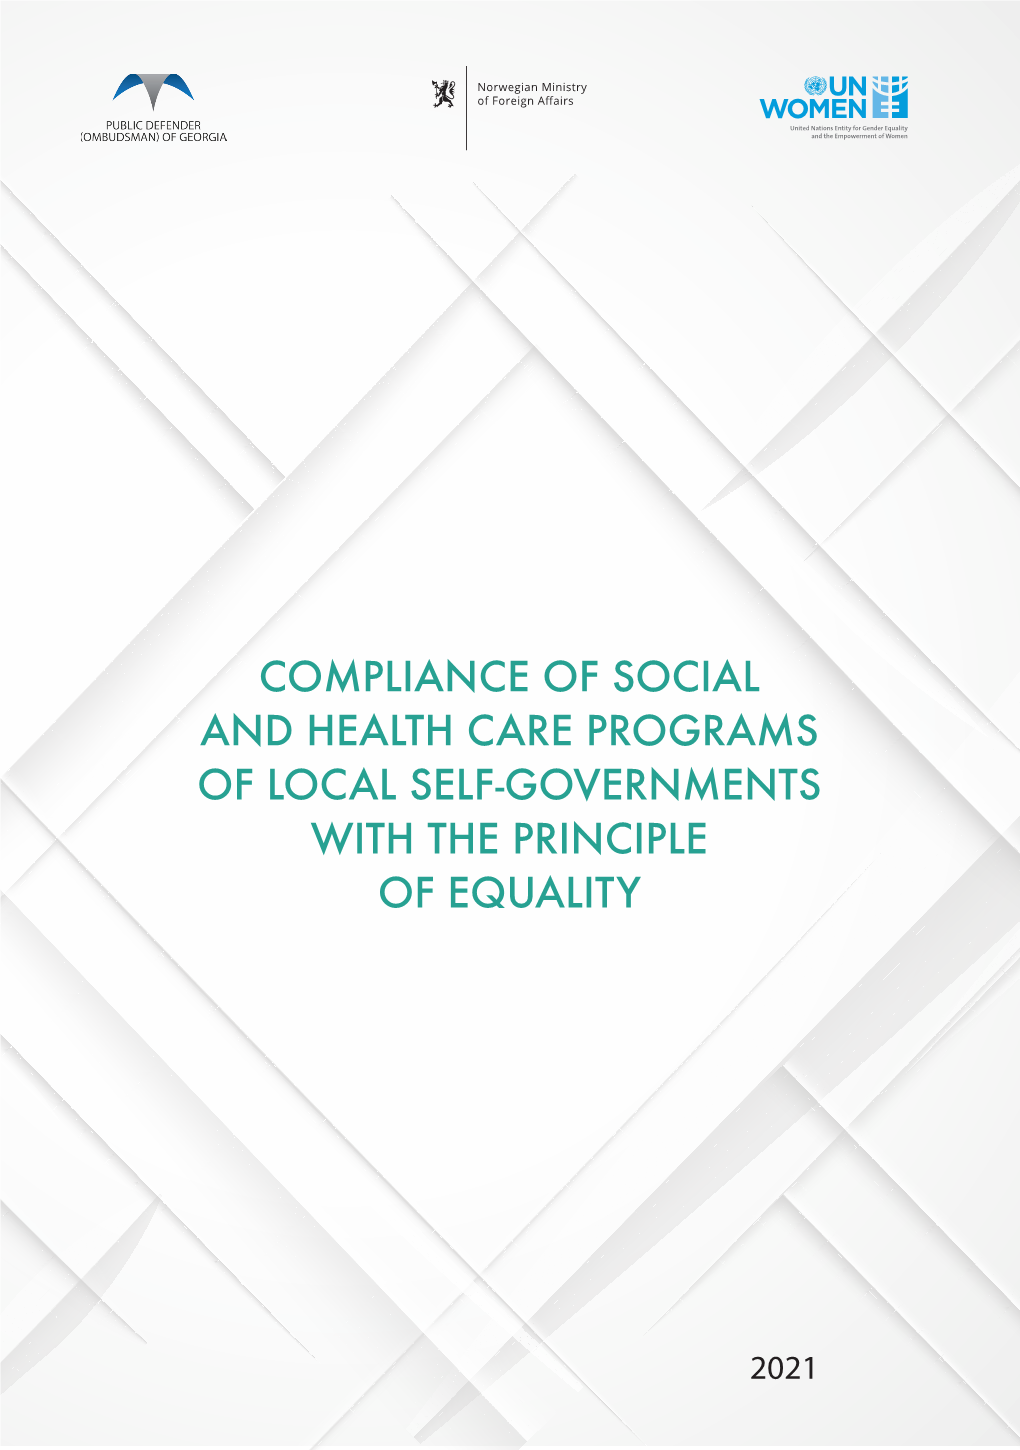 Compliance of Social and Health Care Programs of Local Self-Governments with the Principle of Equality